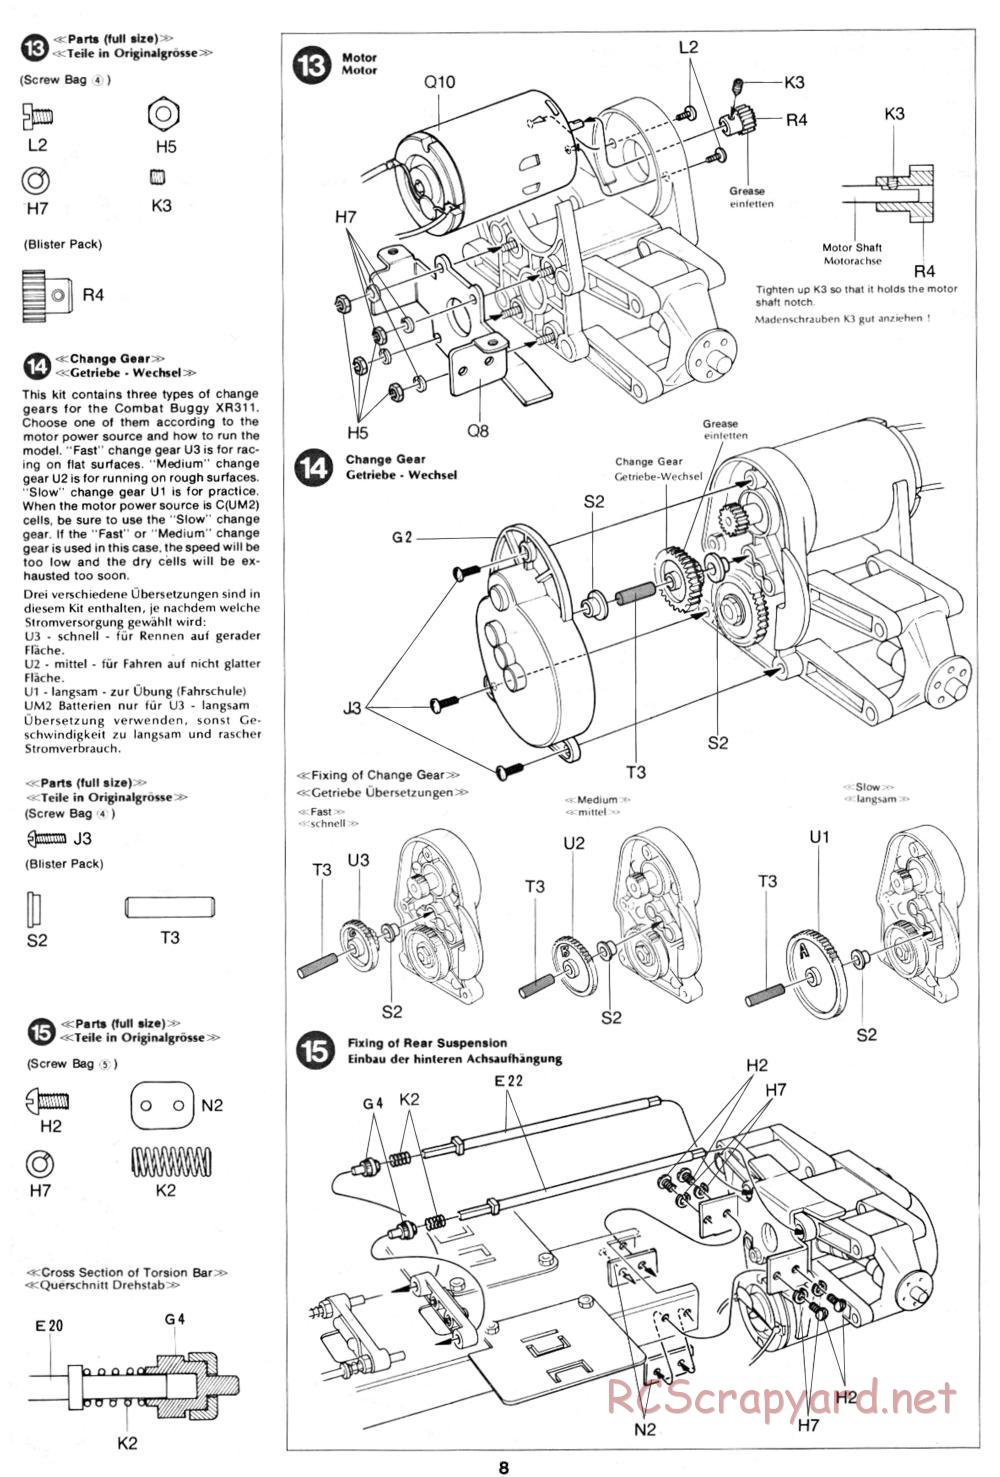 Tamiya - XR311 Combat Support Vehicle (1977) Chassis - Manual - Page 8